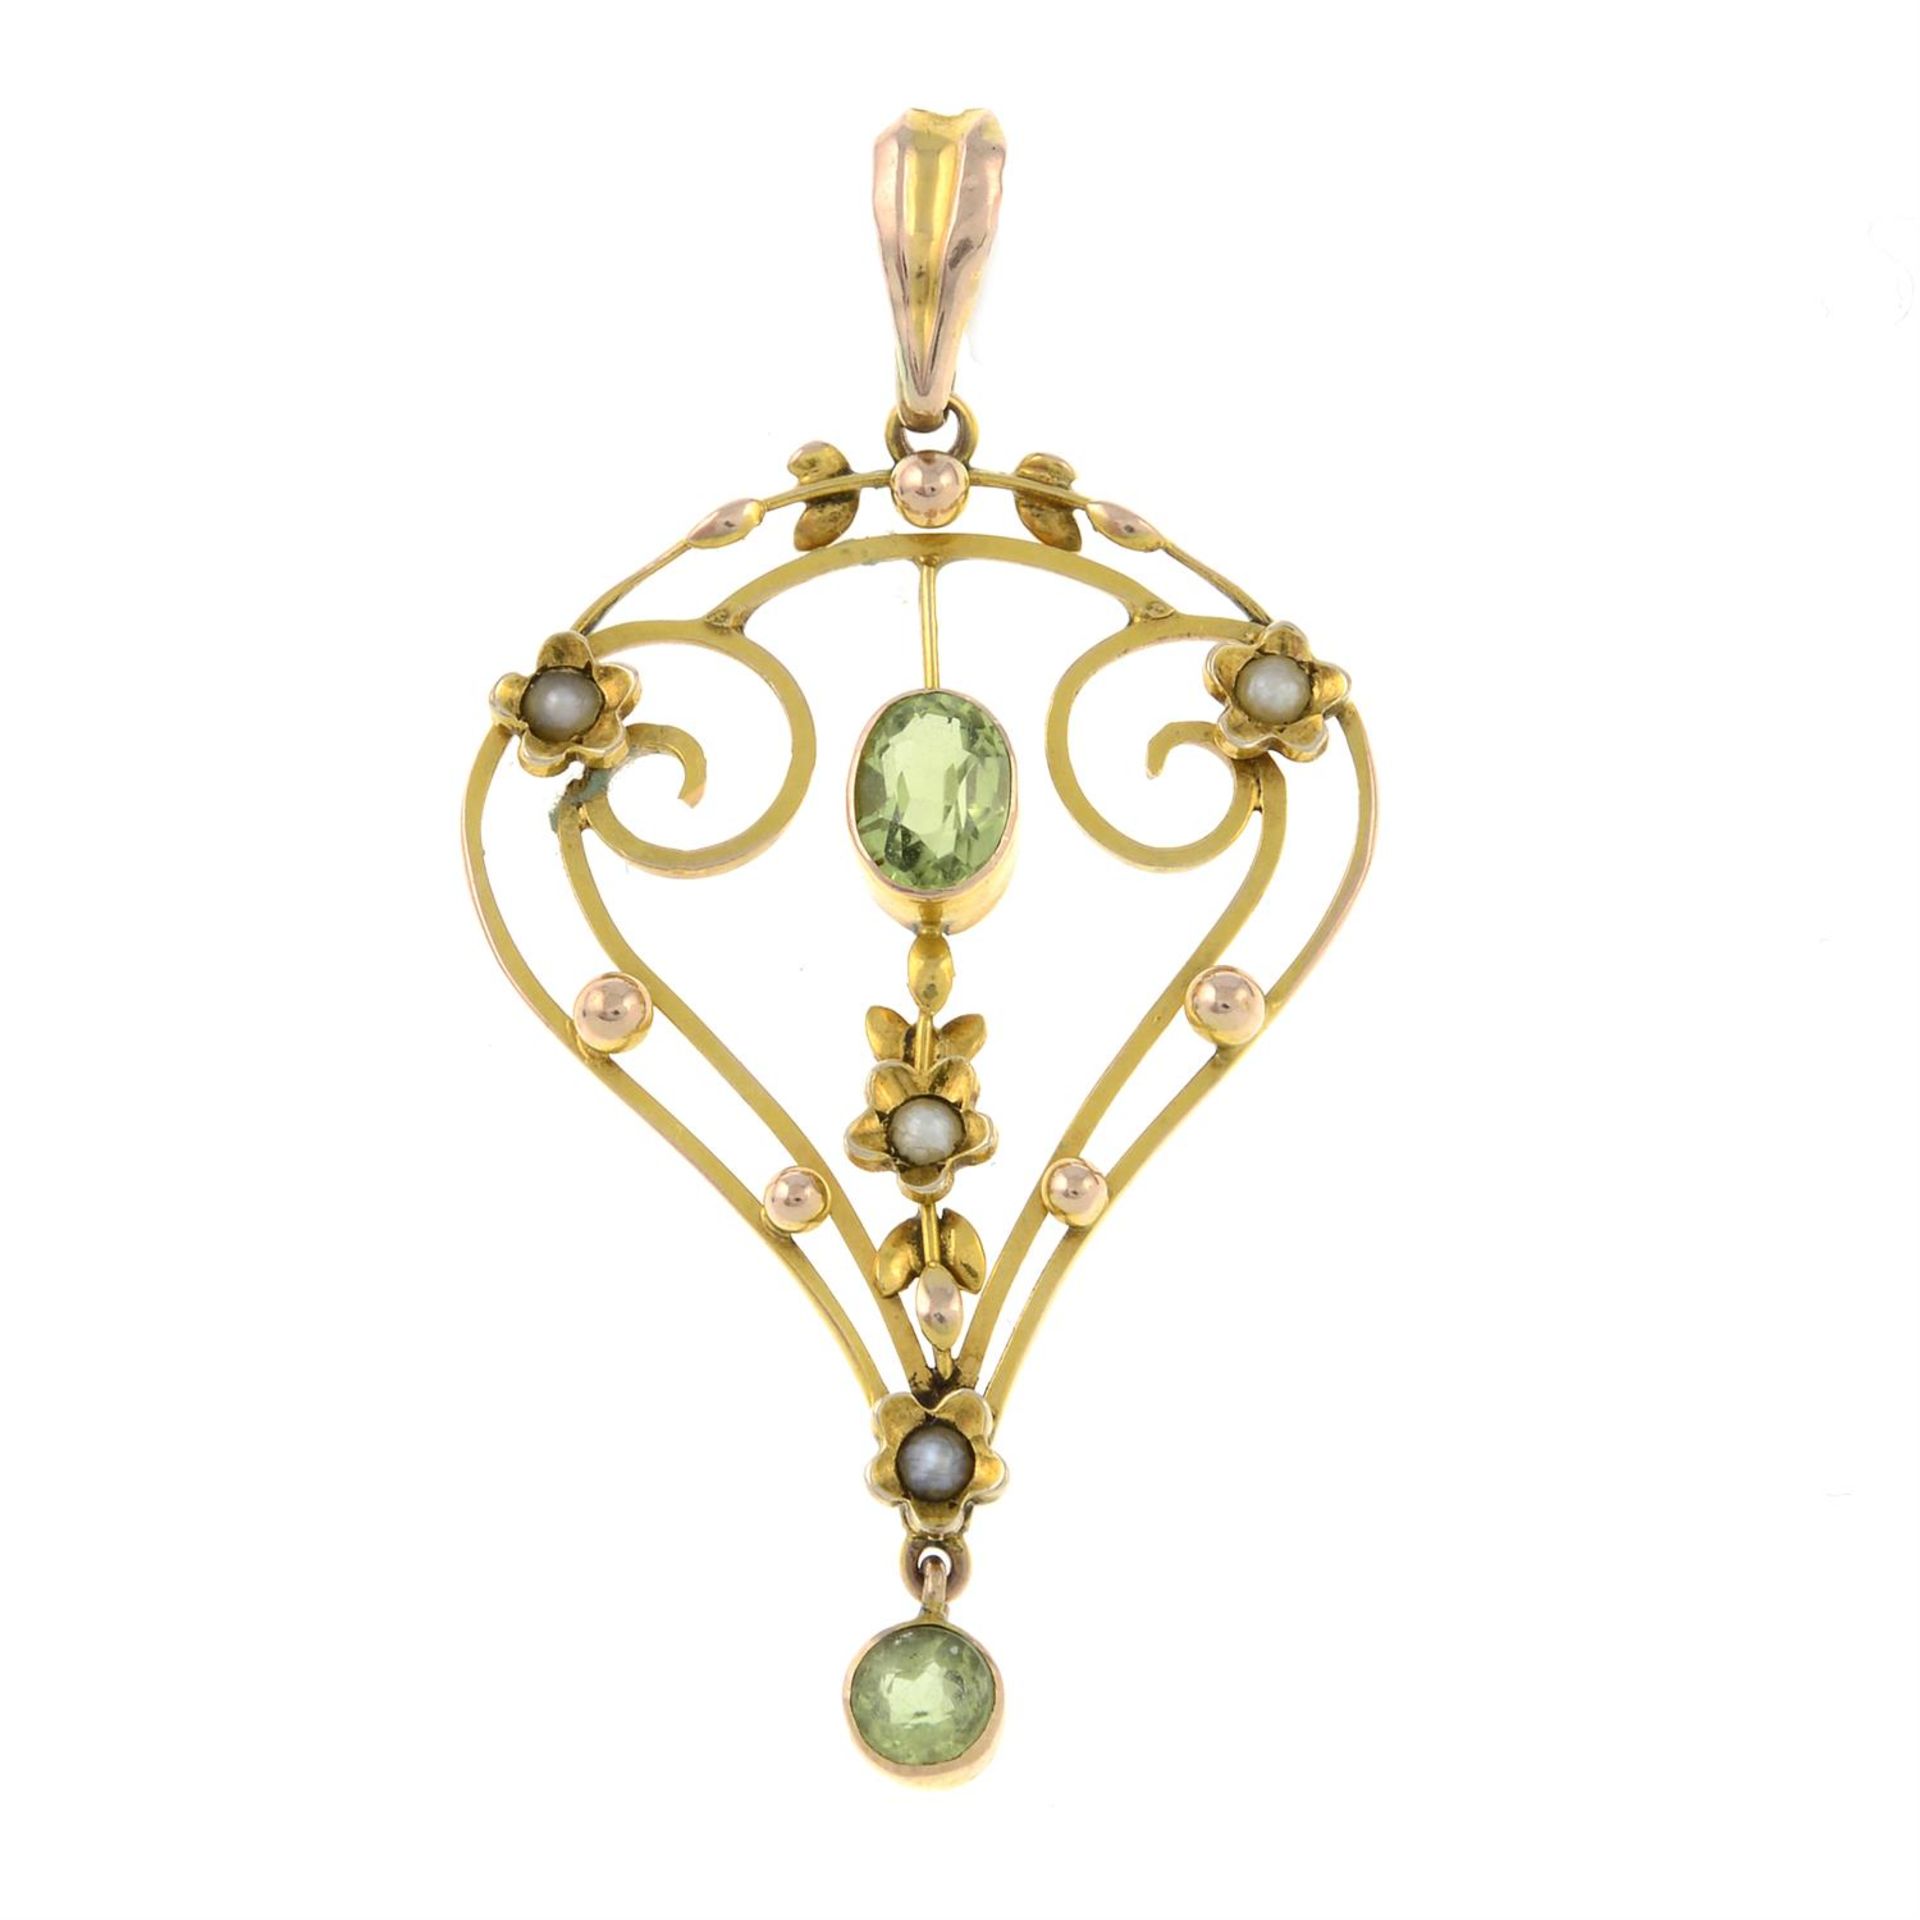 An early 20th century gold peridot and split pearl pendant.